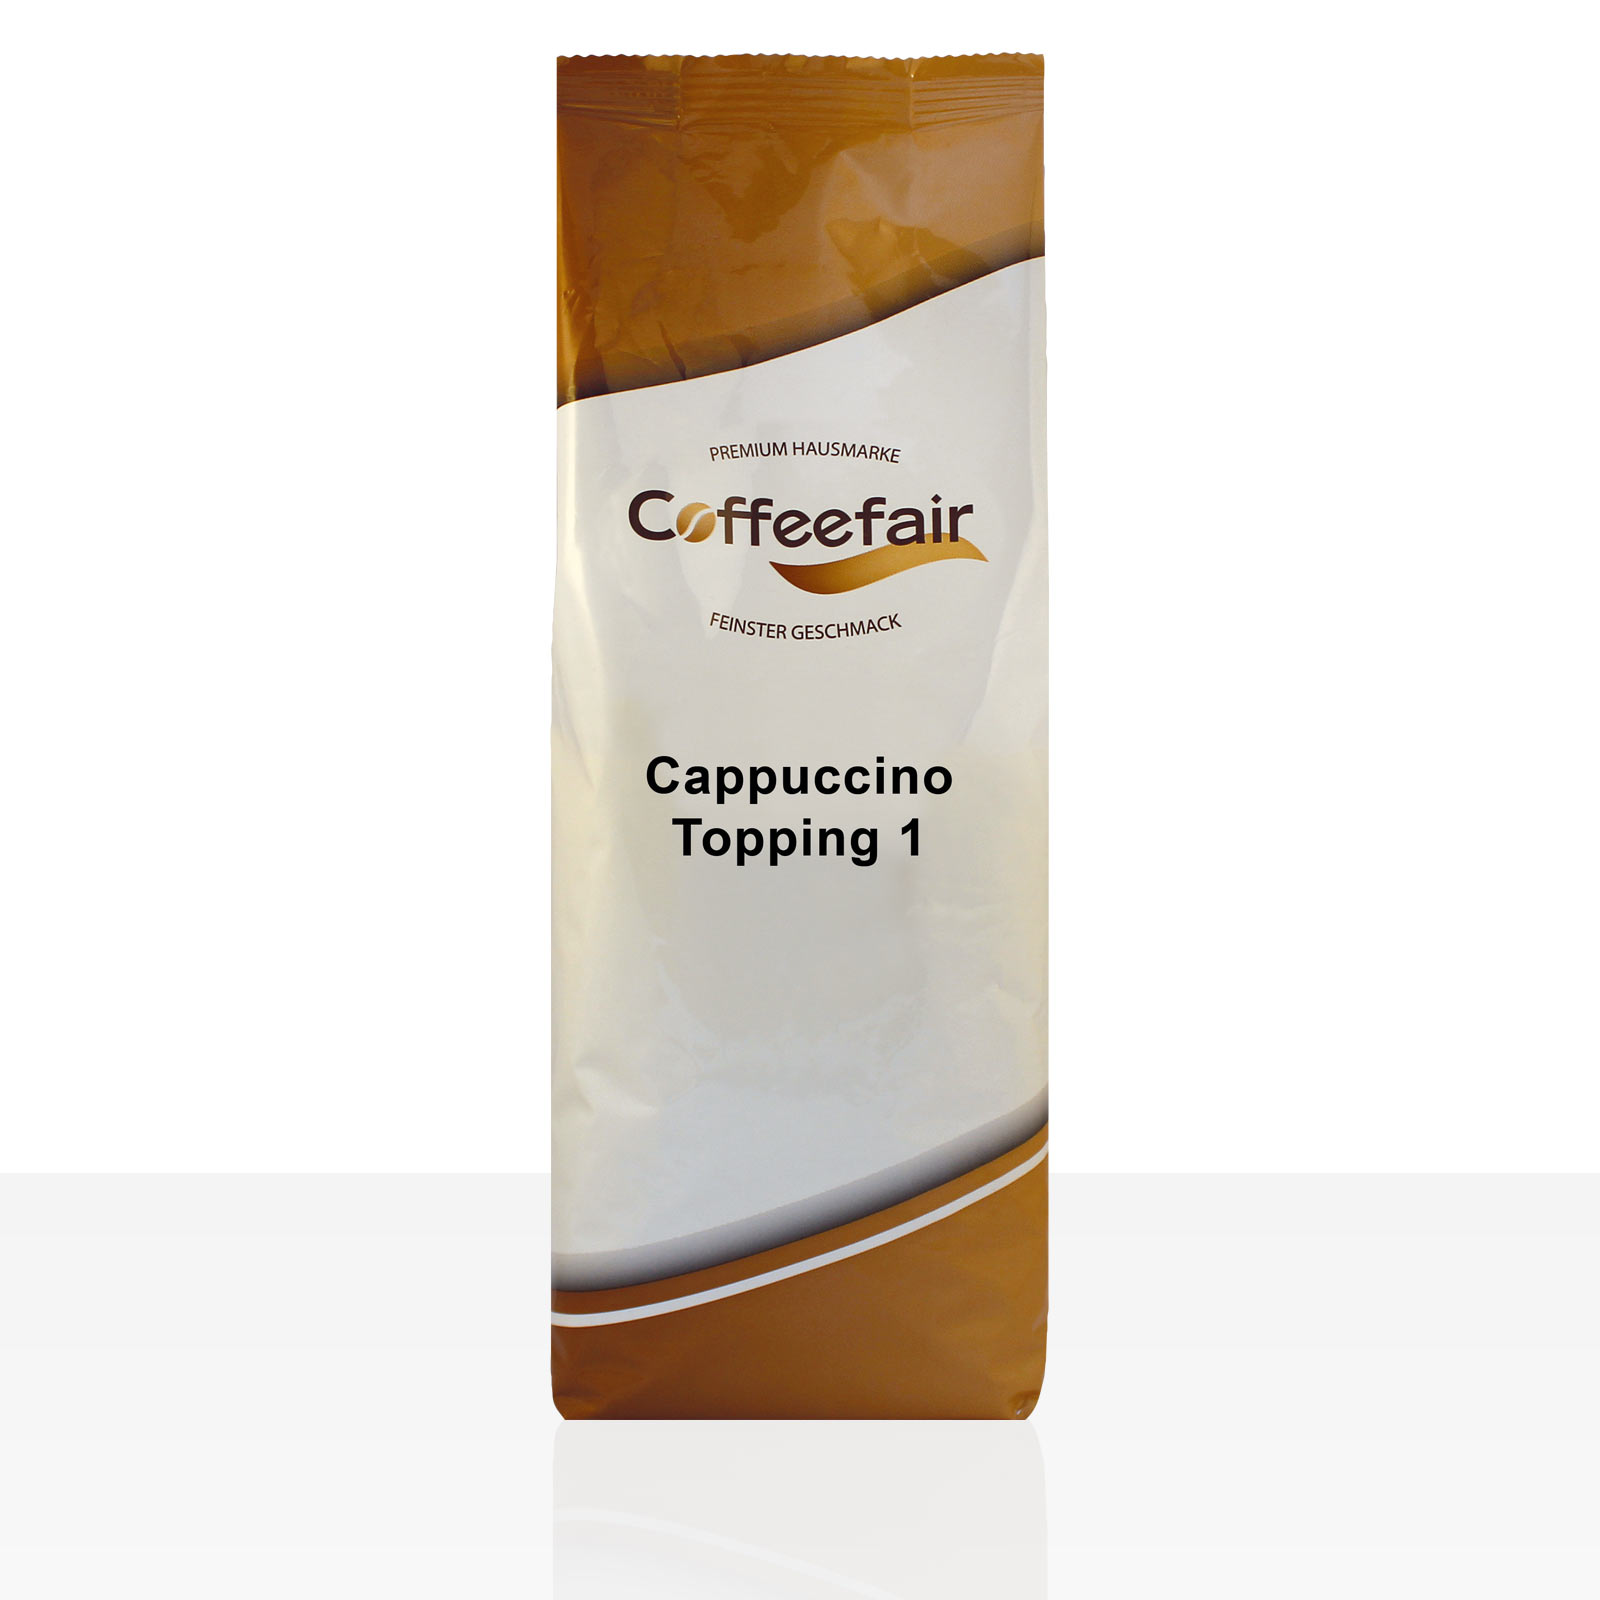 Coffeefair Cappuccino Topping 1 Milchpulver - 10 x 1kg Instant-Milch